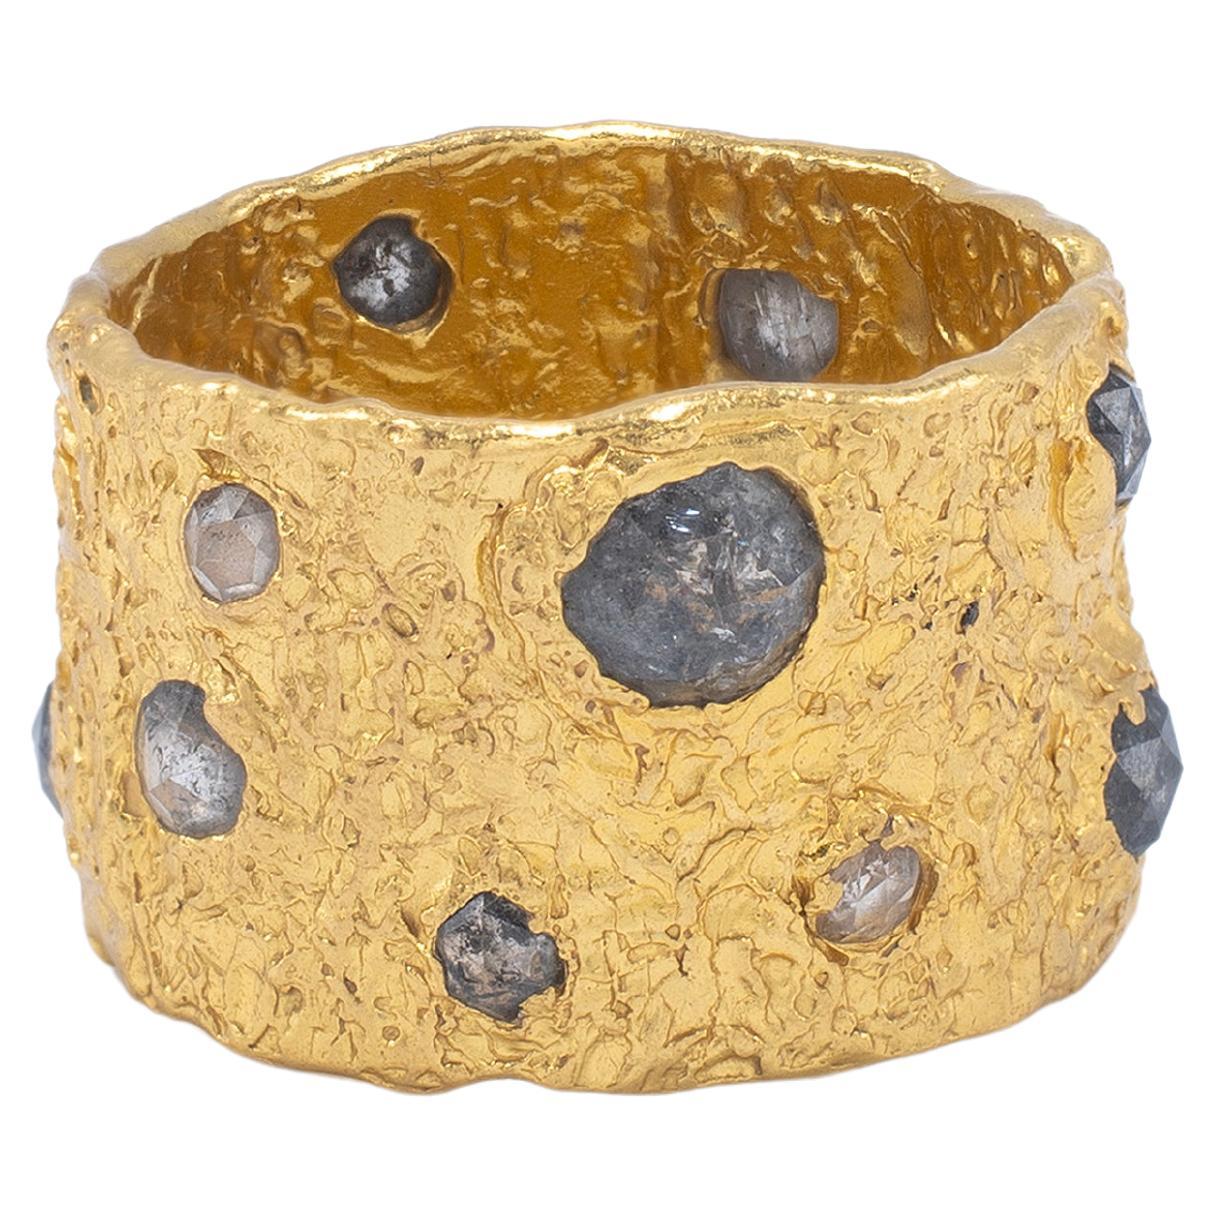 Artemis Salt and Pepper Diamond Ring in 22k Gold, by Tagili